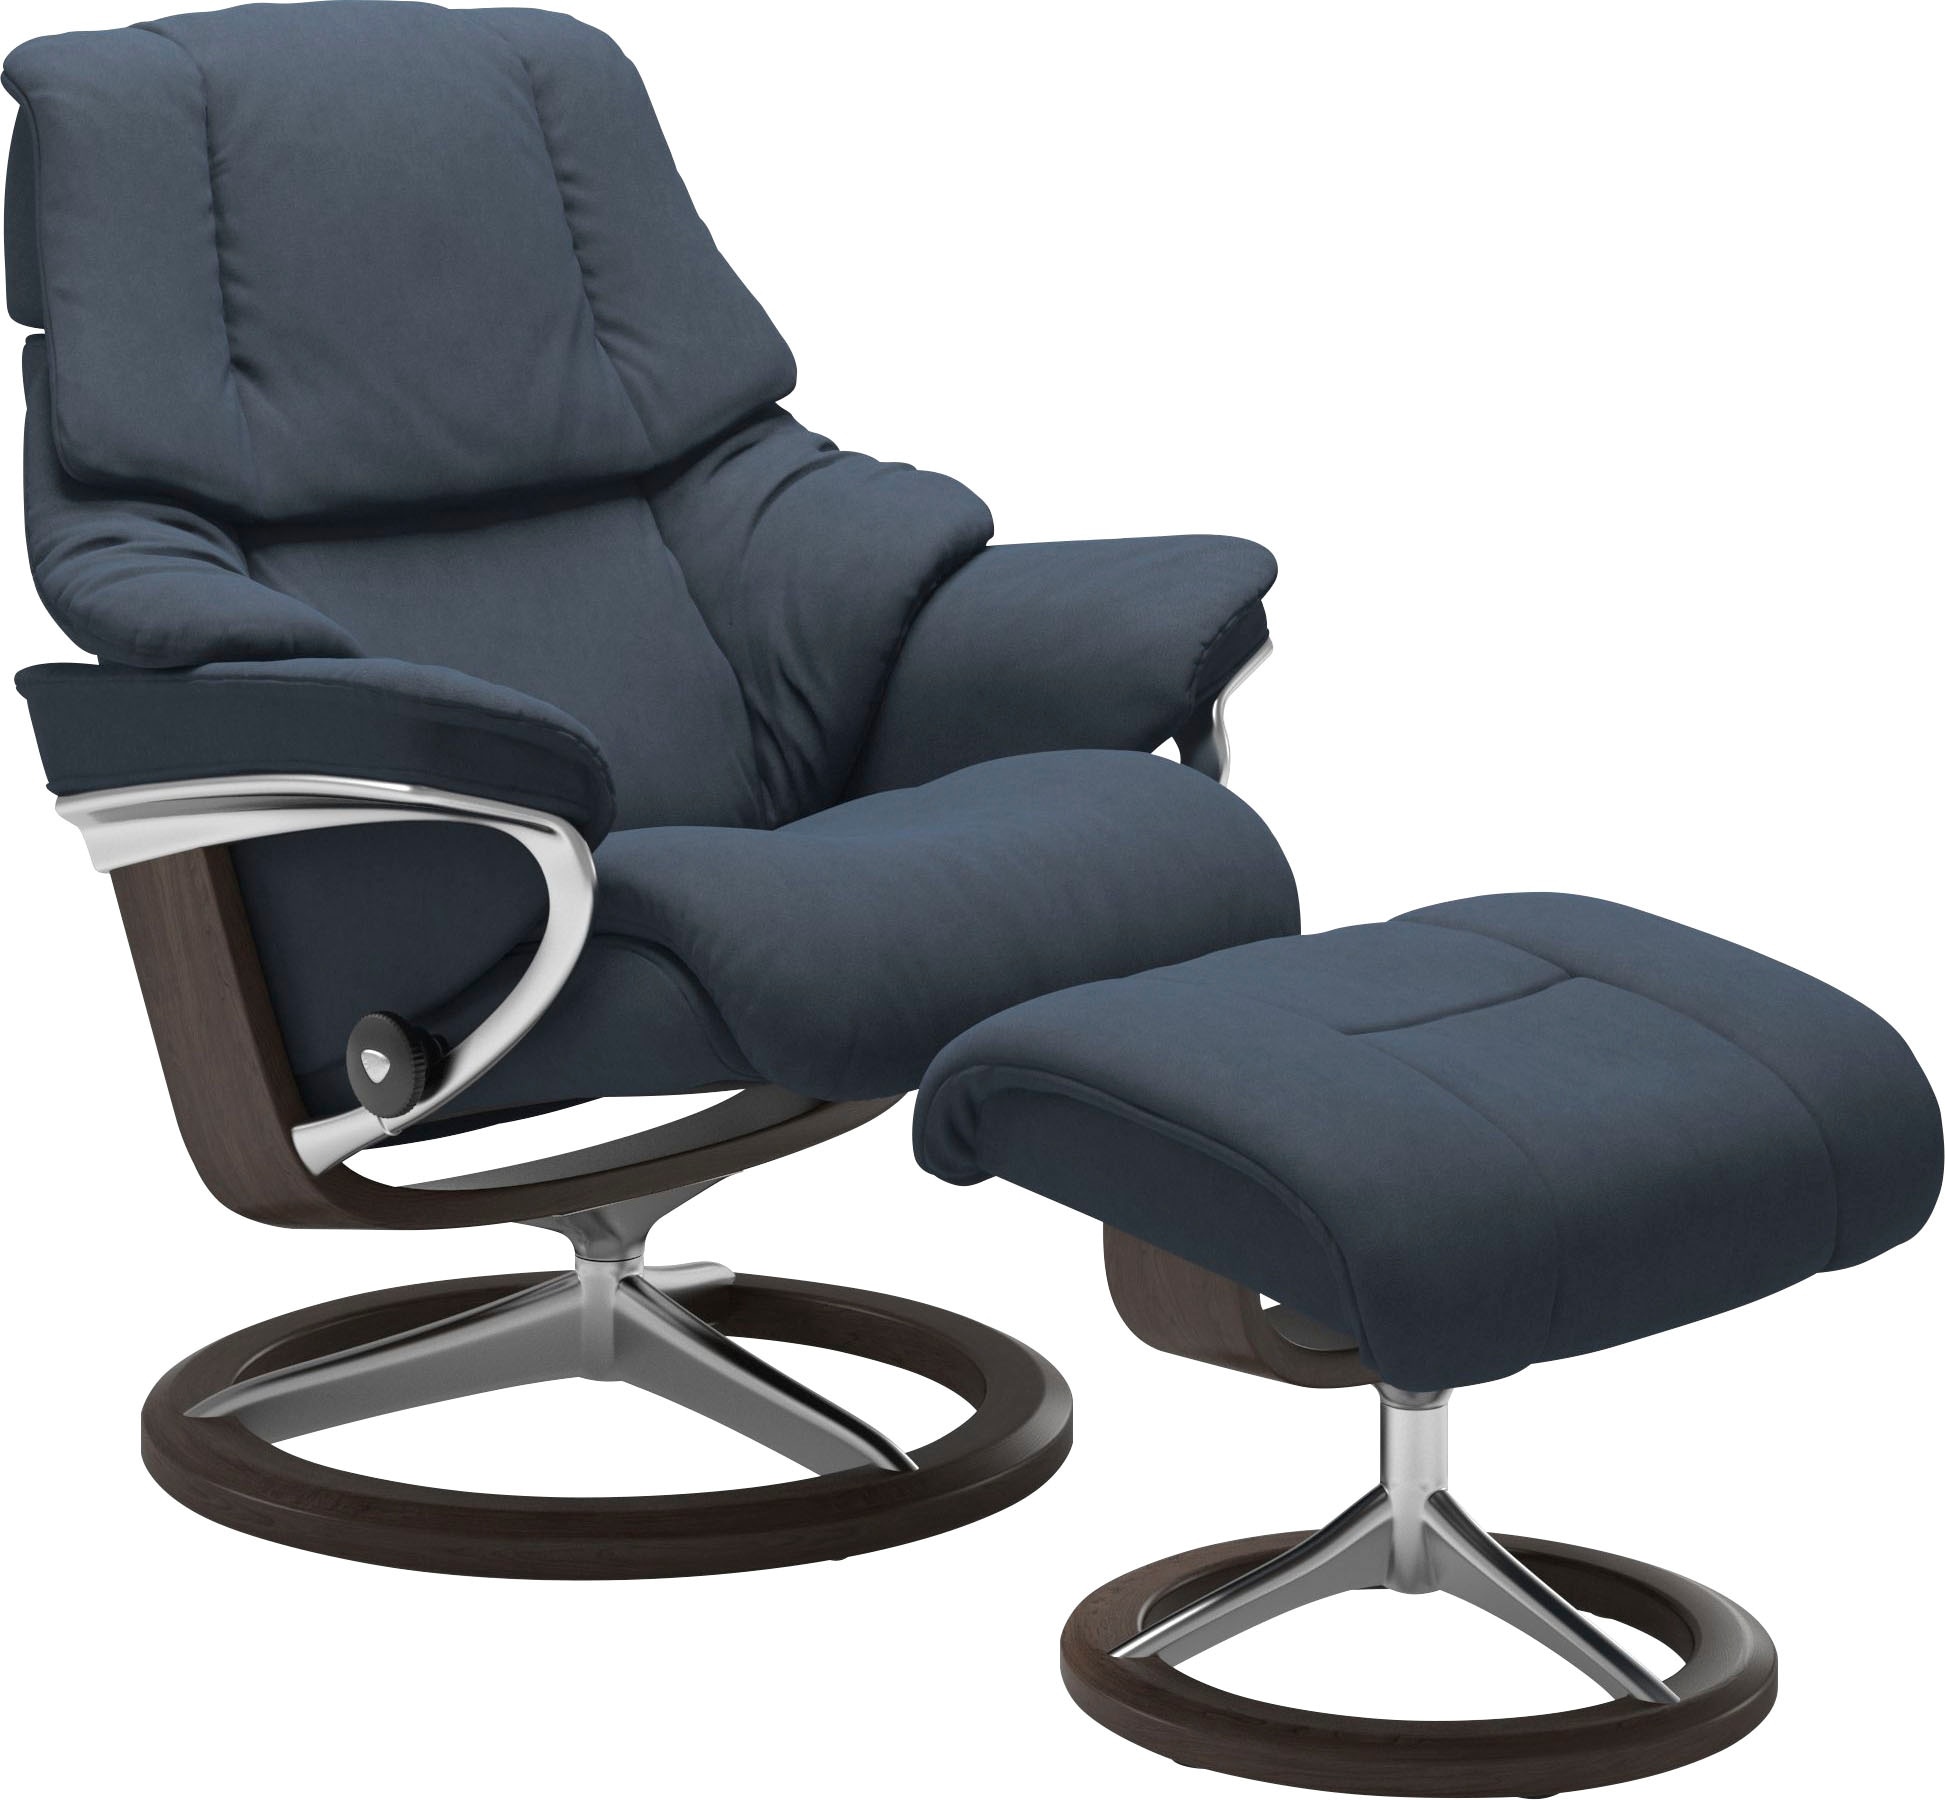 Relaxsessel STRESSLESS "Reno" Sessel Gr. Microfaser DINAMICA, Signature Base Wenge, Relaxfunktion-Drehfunktion-PlusTMSystem-Gleitsystem-BalanceAdaptTM, B/H/T: 79 cm x 99 cm x 75 cm, blau (blue dinamica) Lesesessel und Relaxsessel